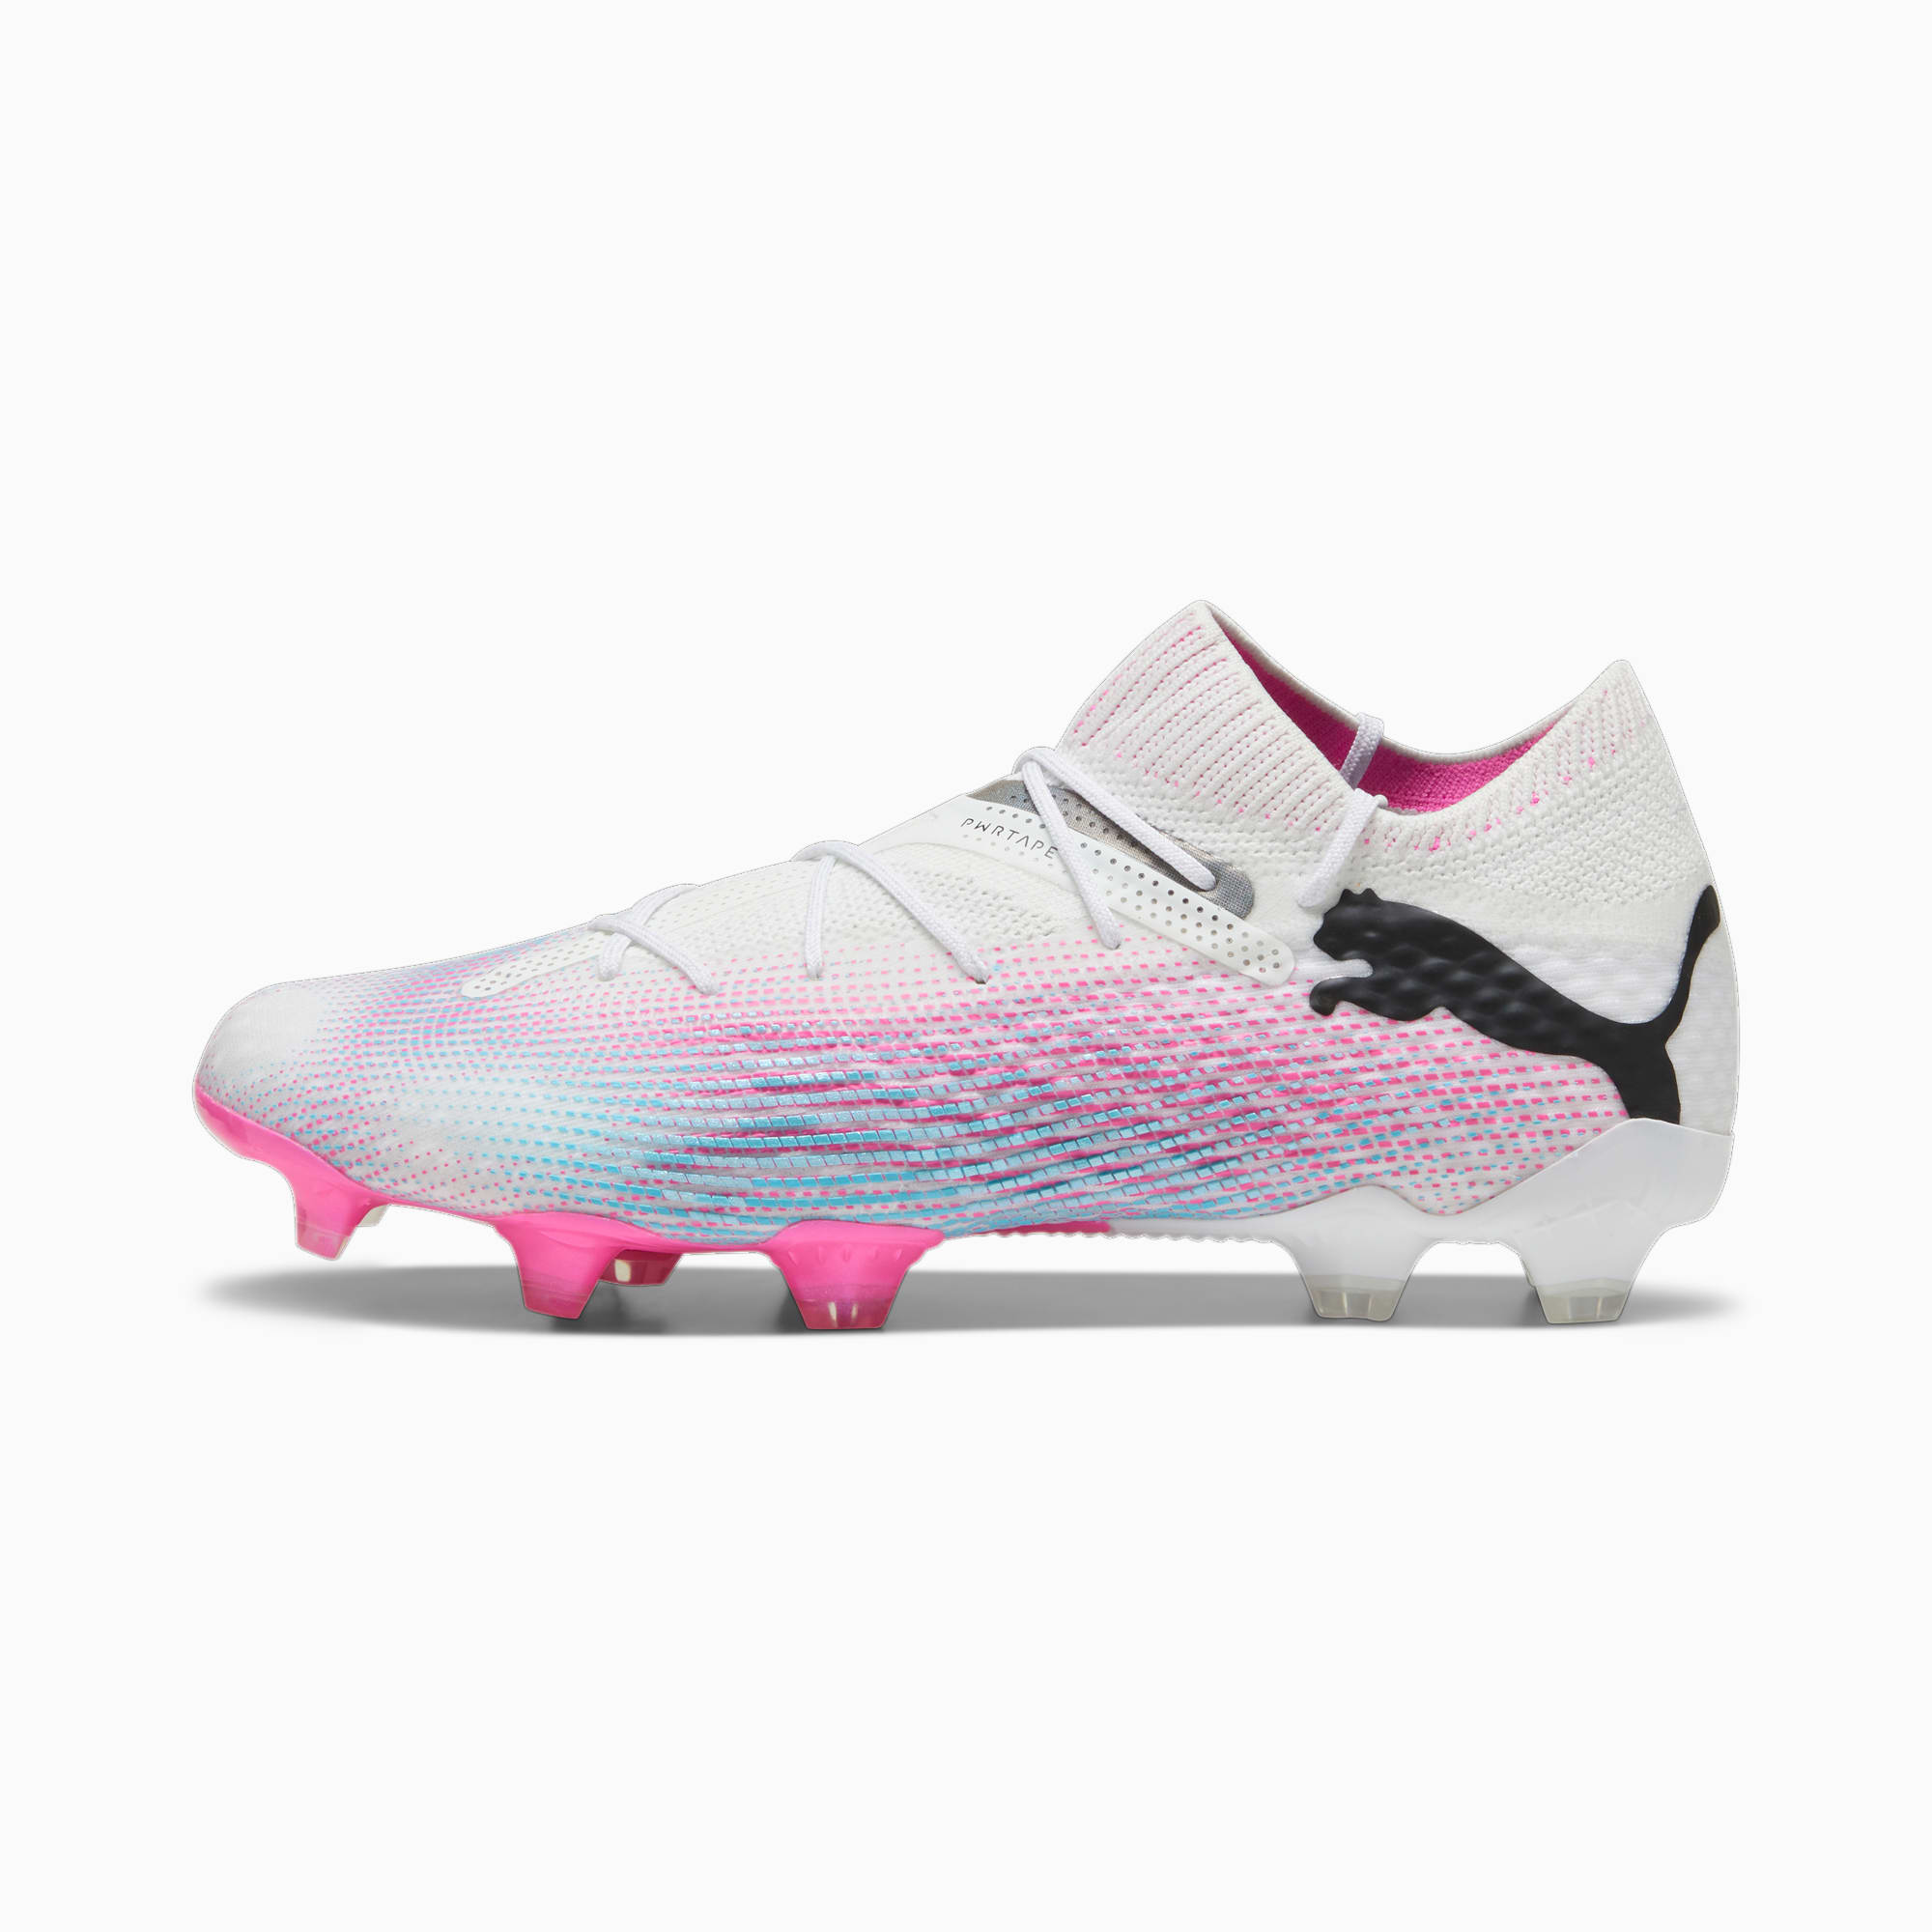 FUTURE 7 ULTIMATE FG/AG Men's Soccer Cleats